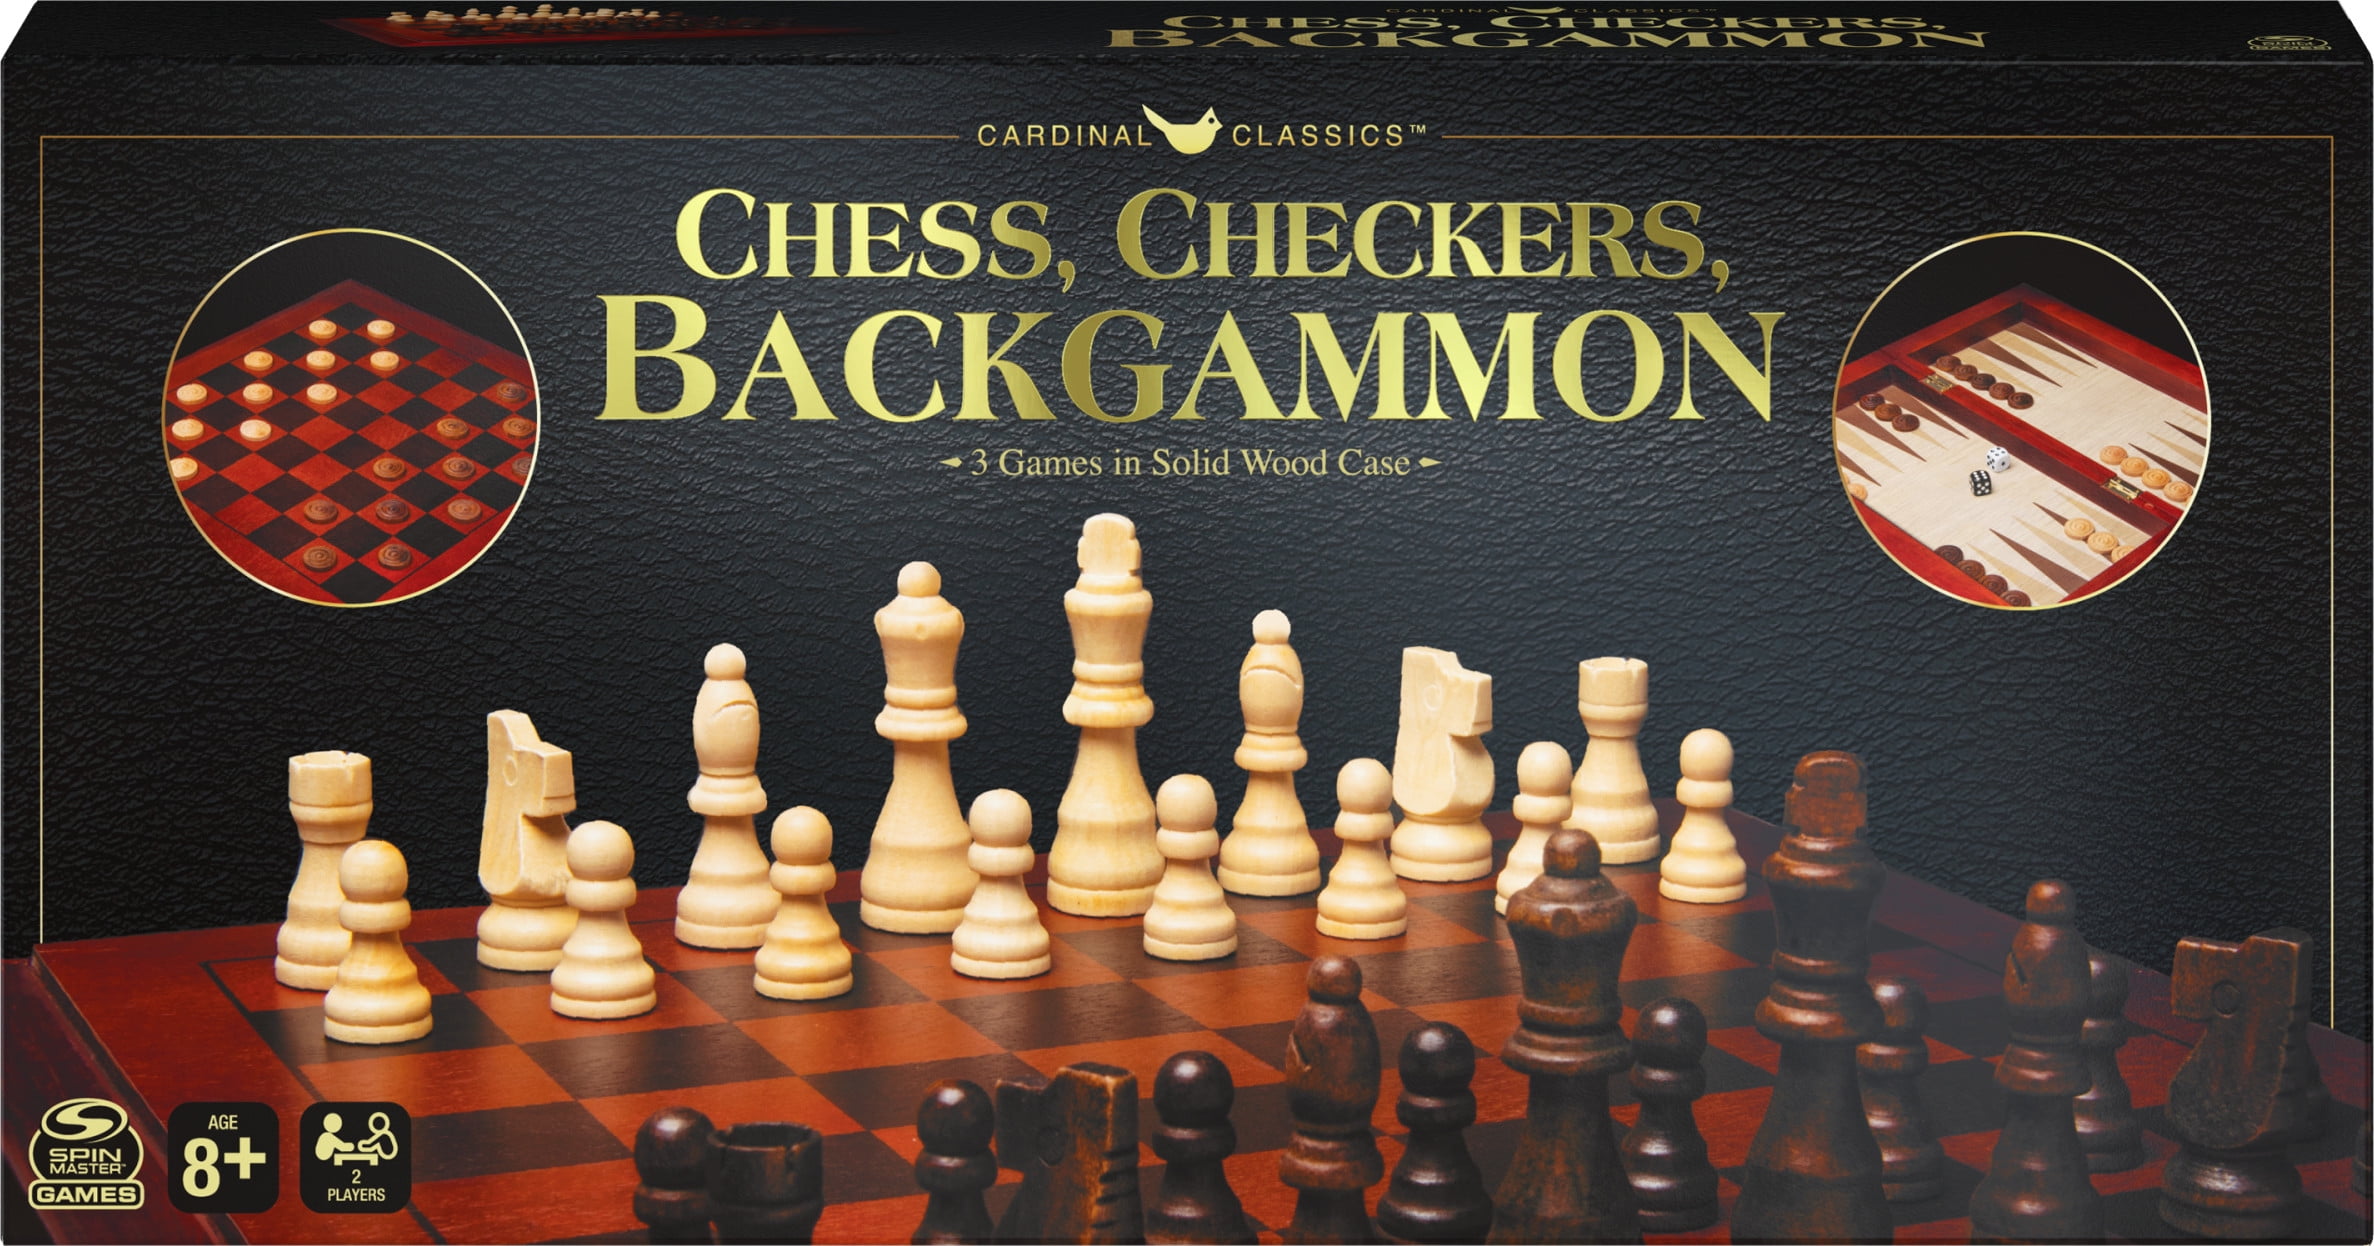 Backgammon Board & Chess SetHandmade in LebanonWood Inlaid Checkers Pieces